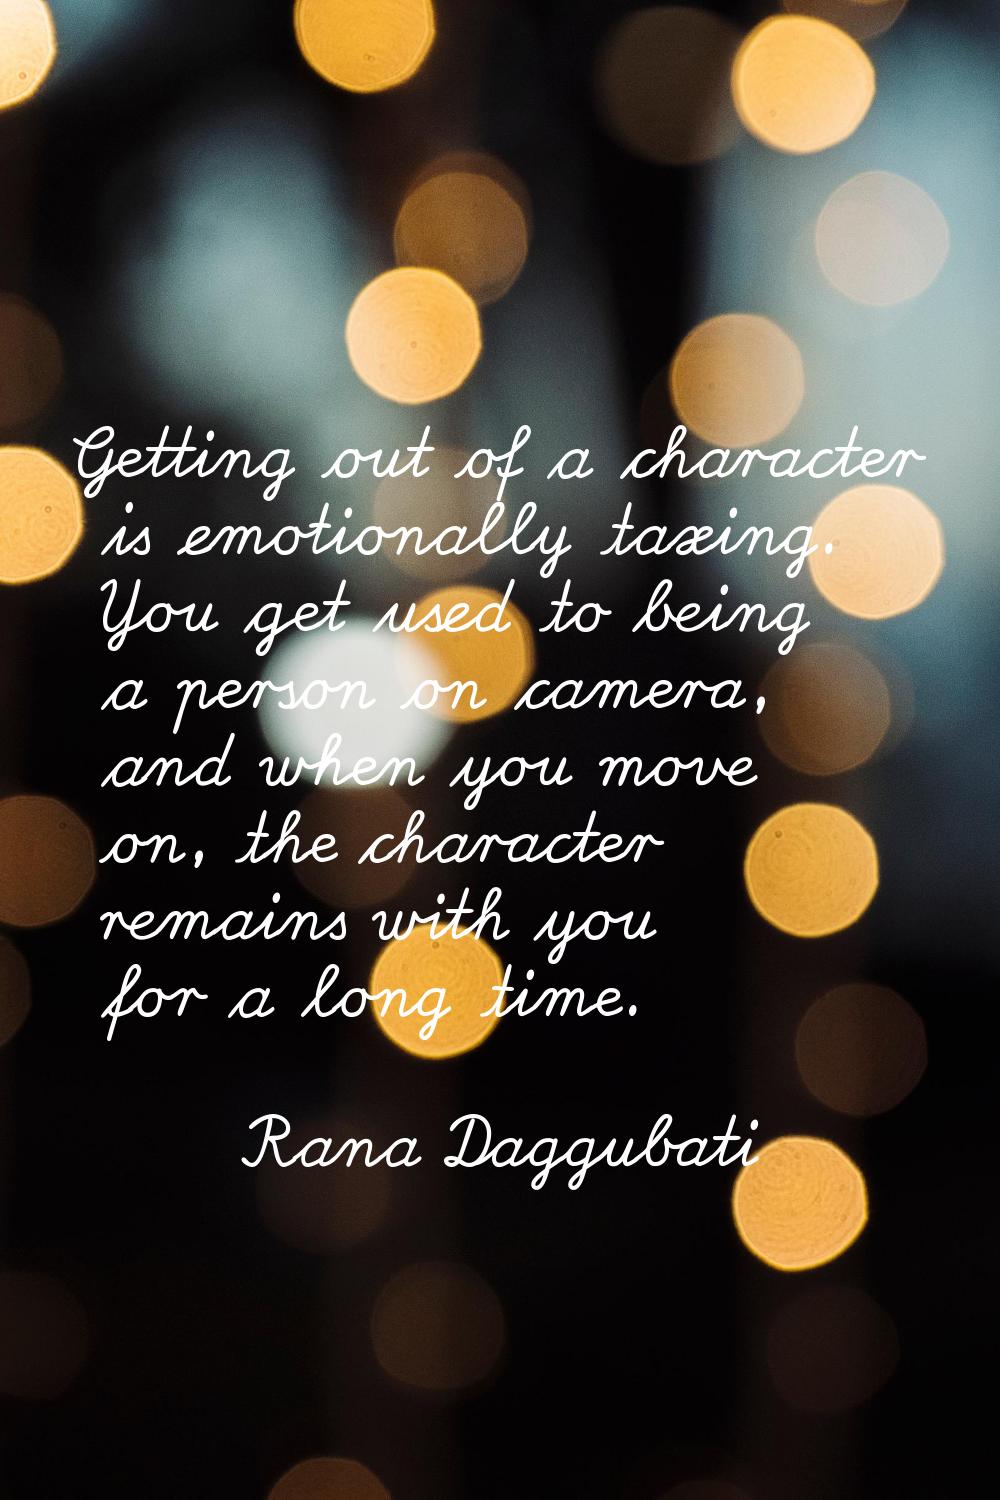 Getting out of a character is emotionally taxing. You get used to being a person on camera, and whe